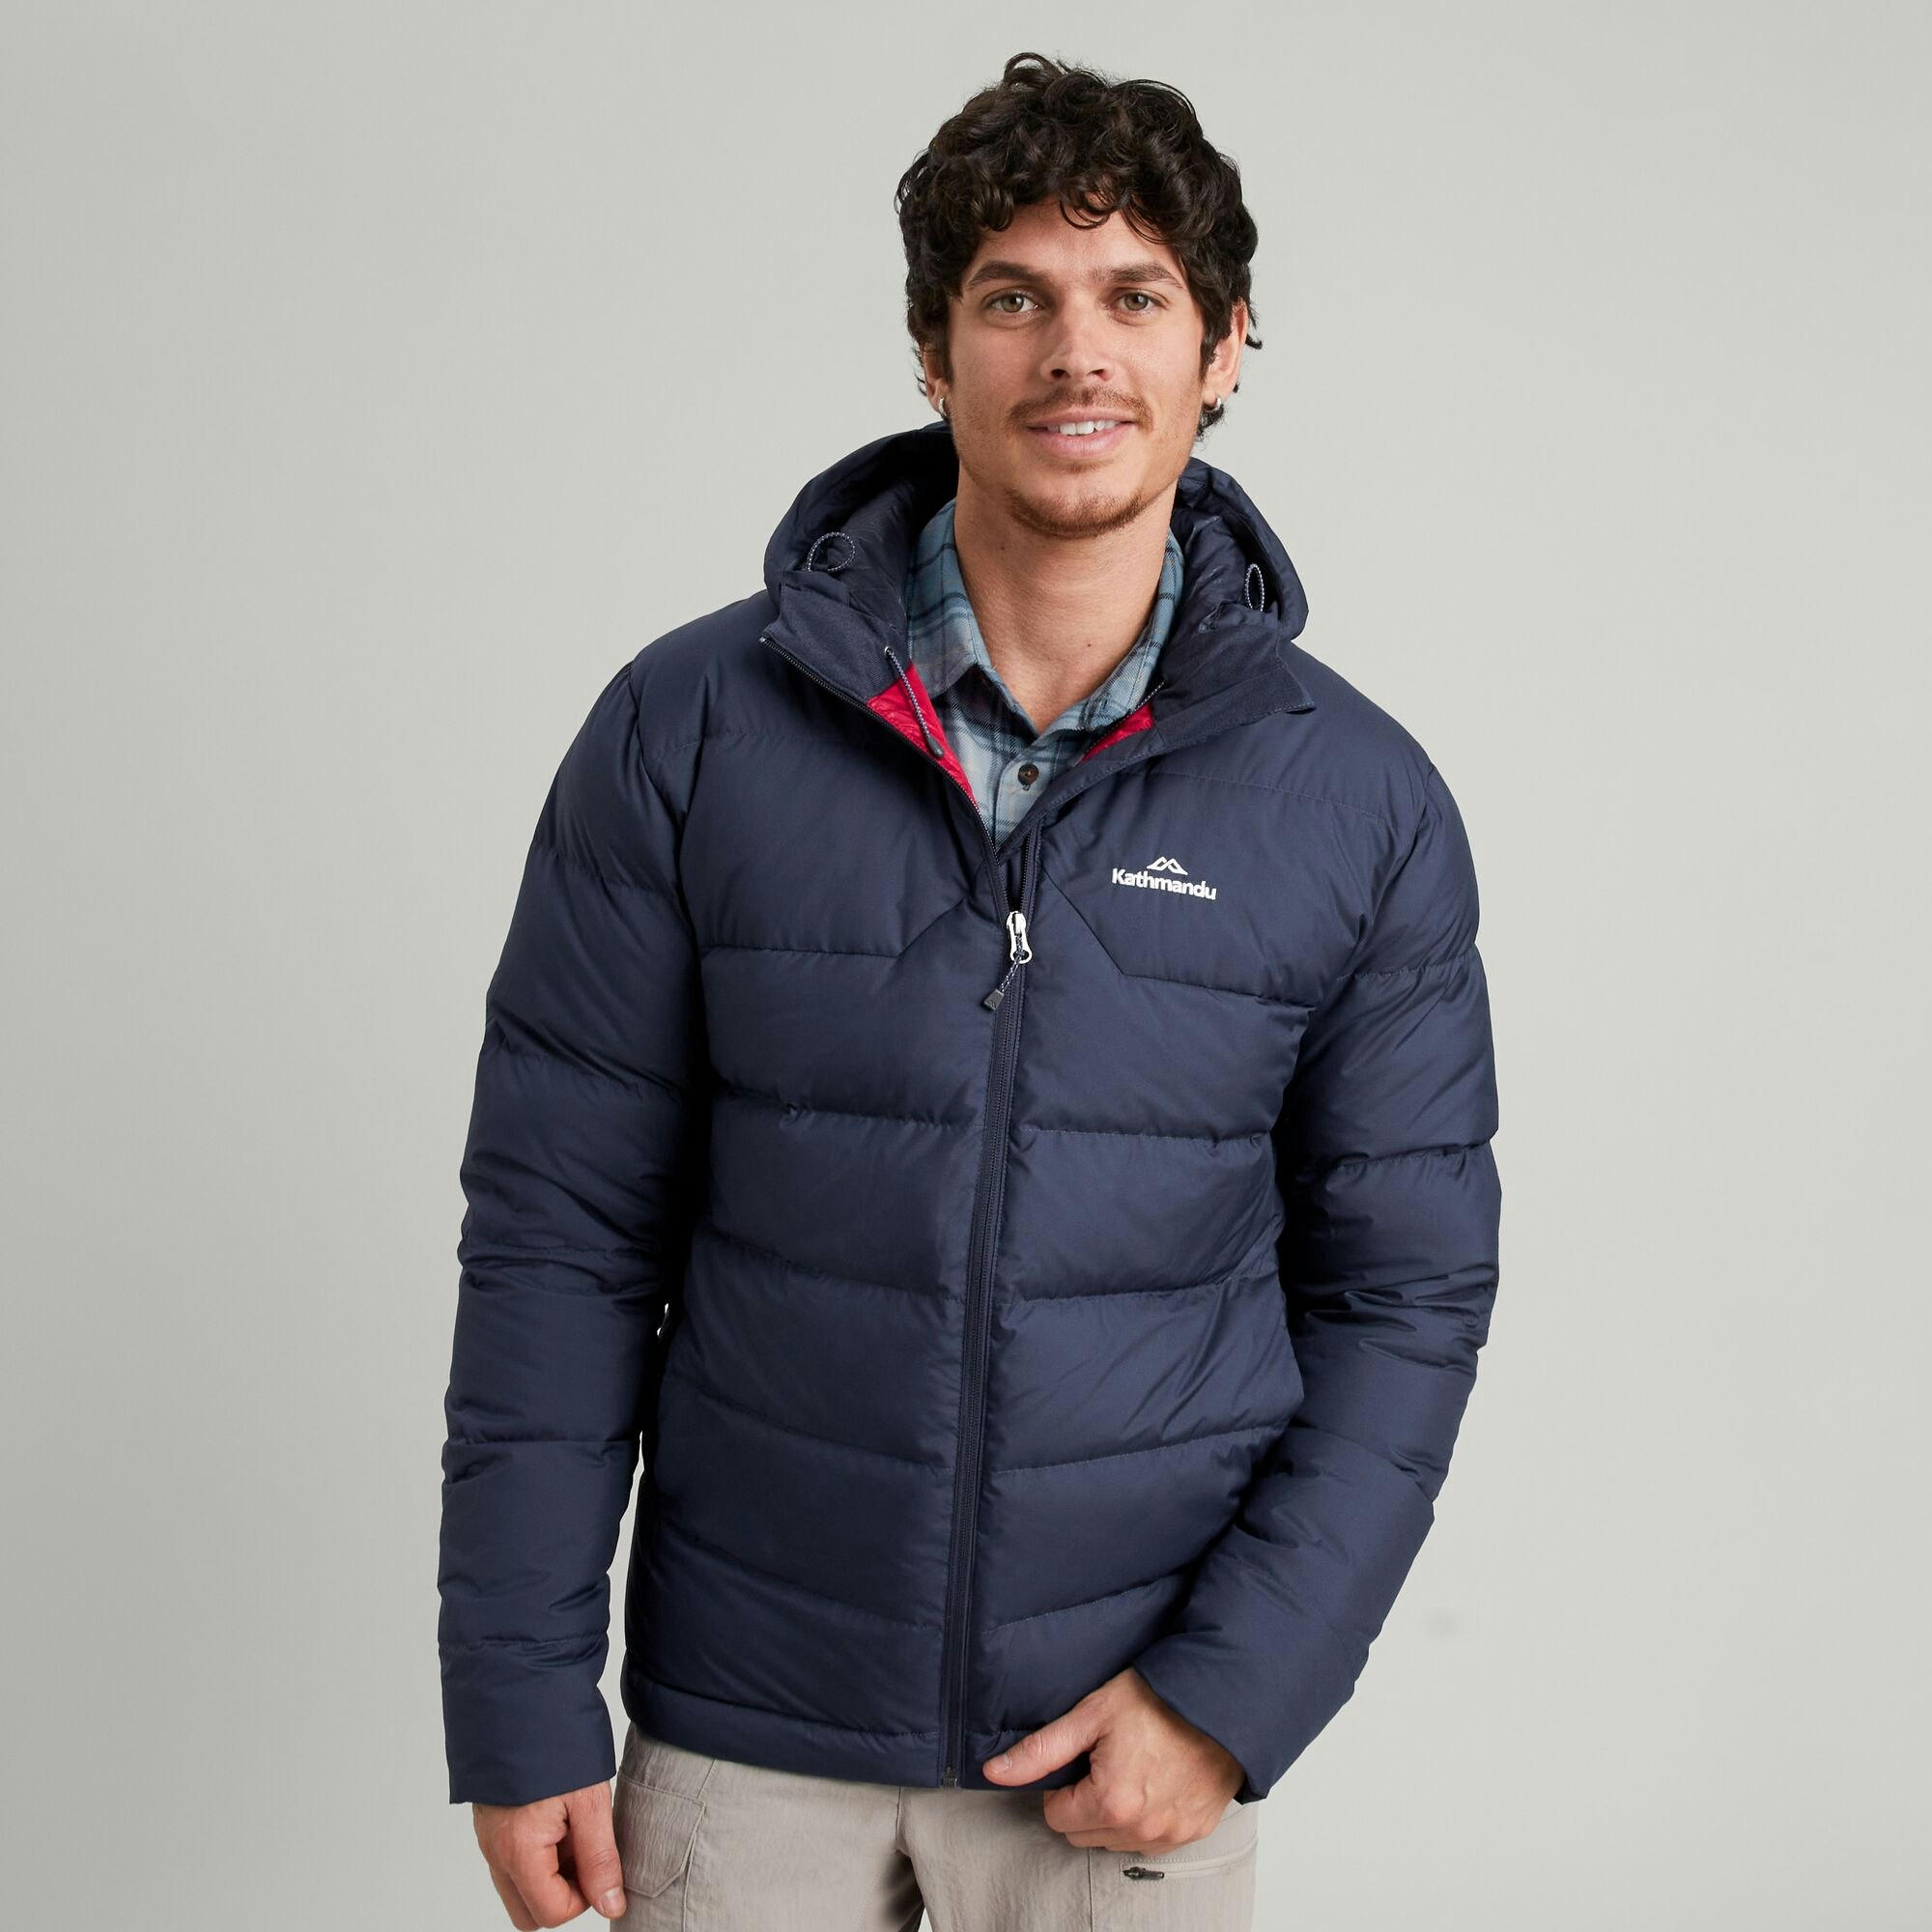 Men's Outdoor Clothing, Outerwear & Accessories